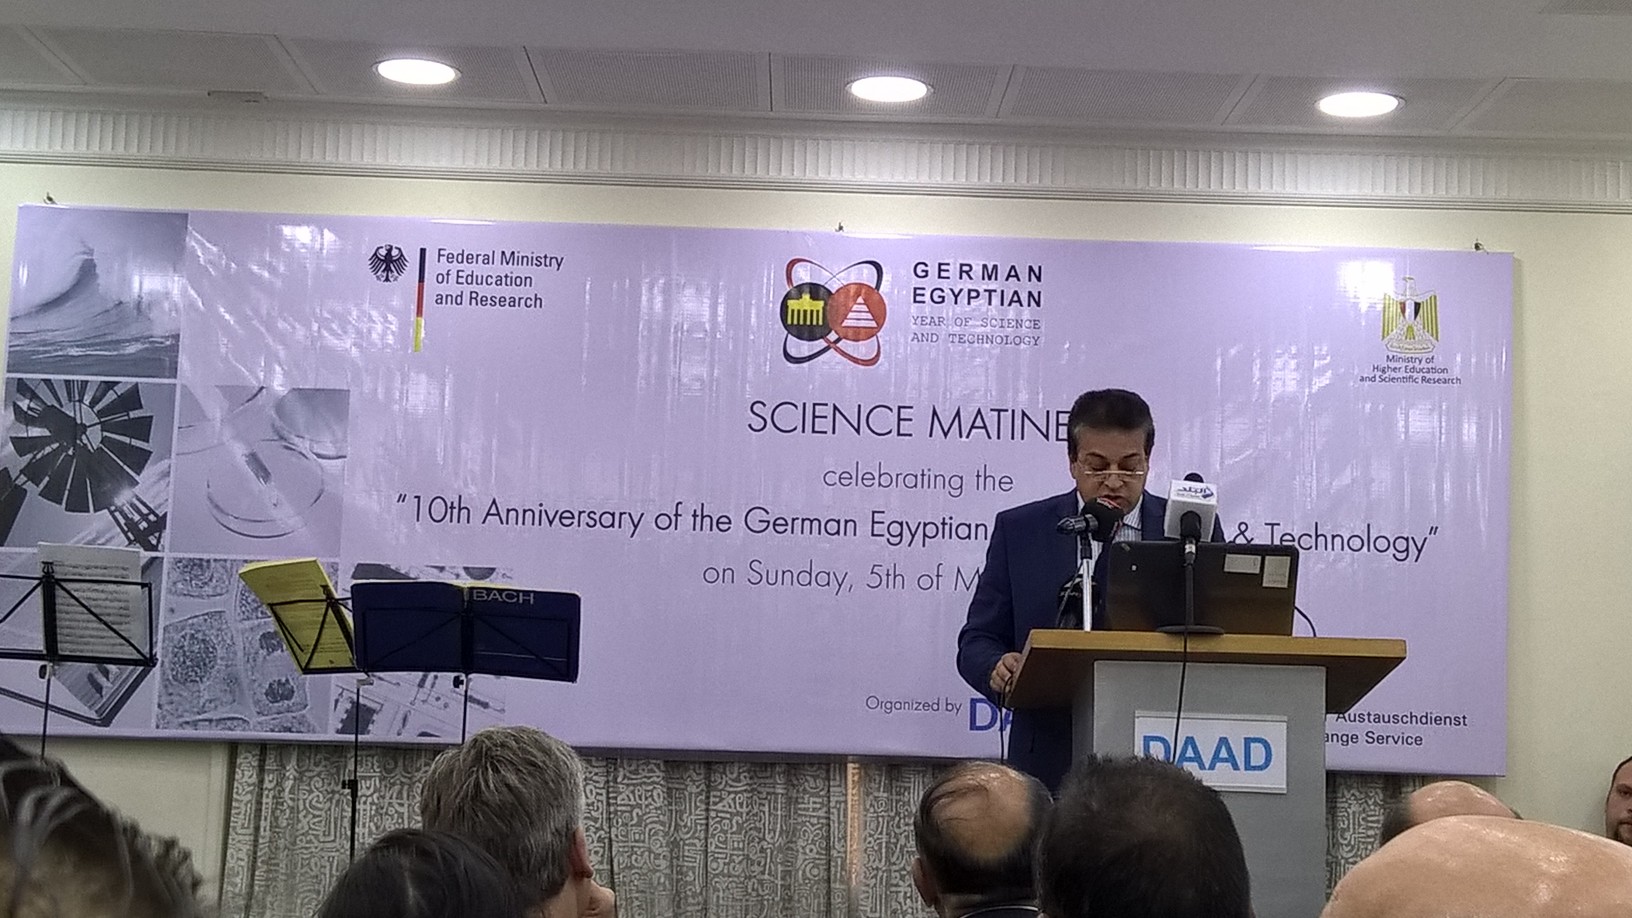 the 10th anniversary of the German Egyptian Year of Science & Technology